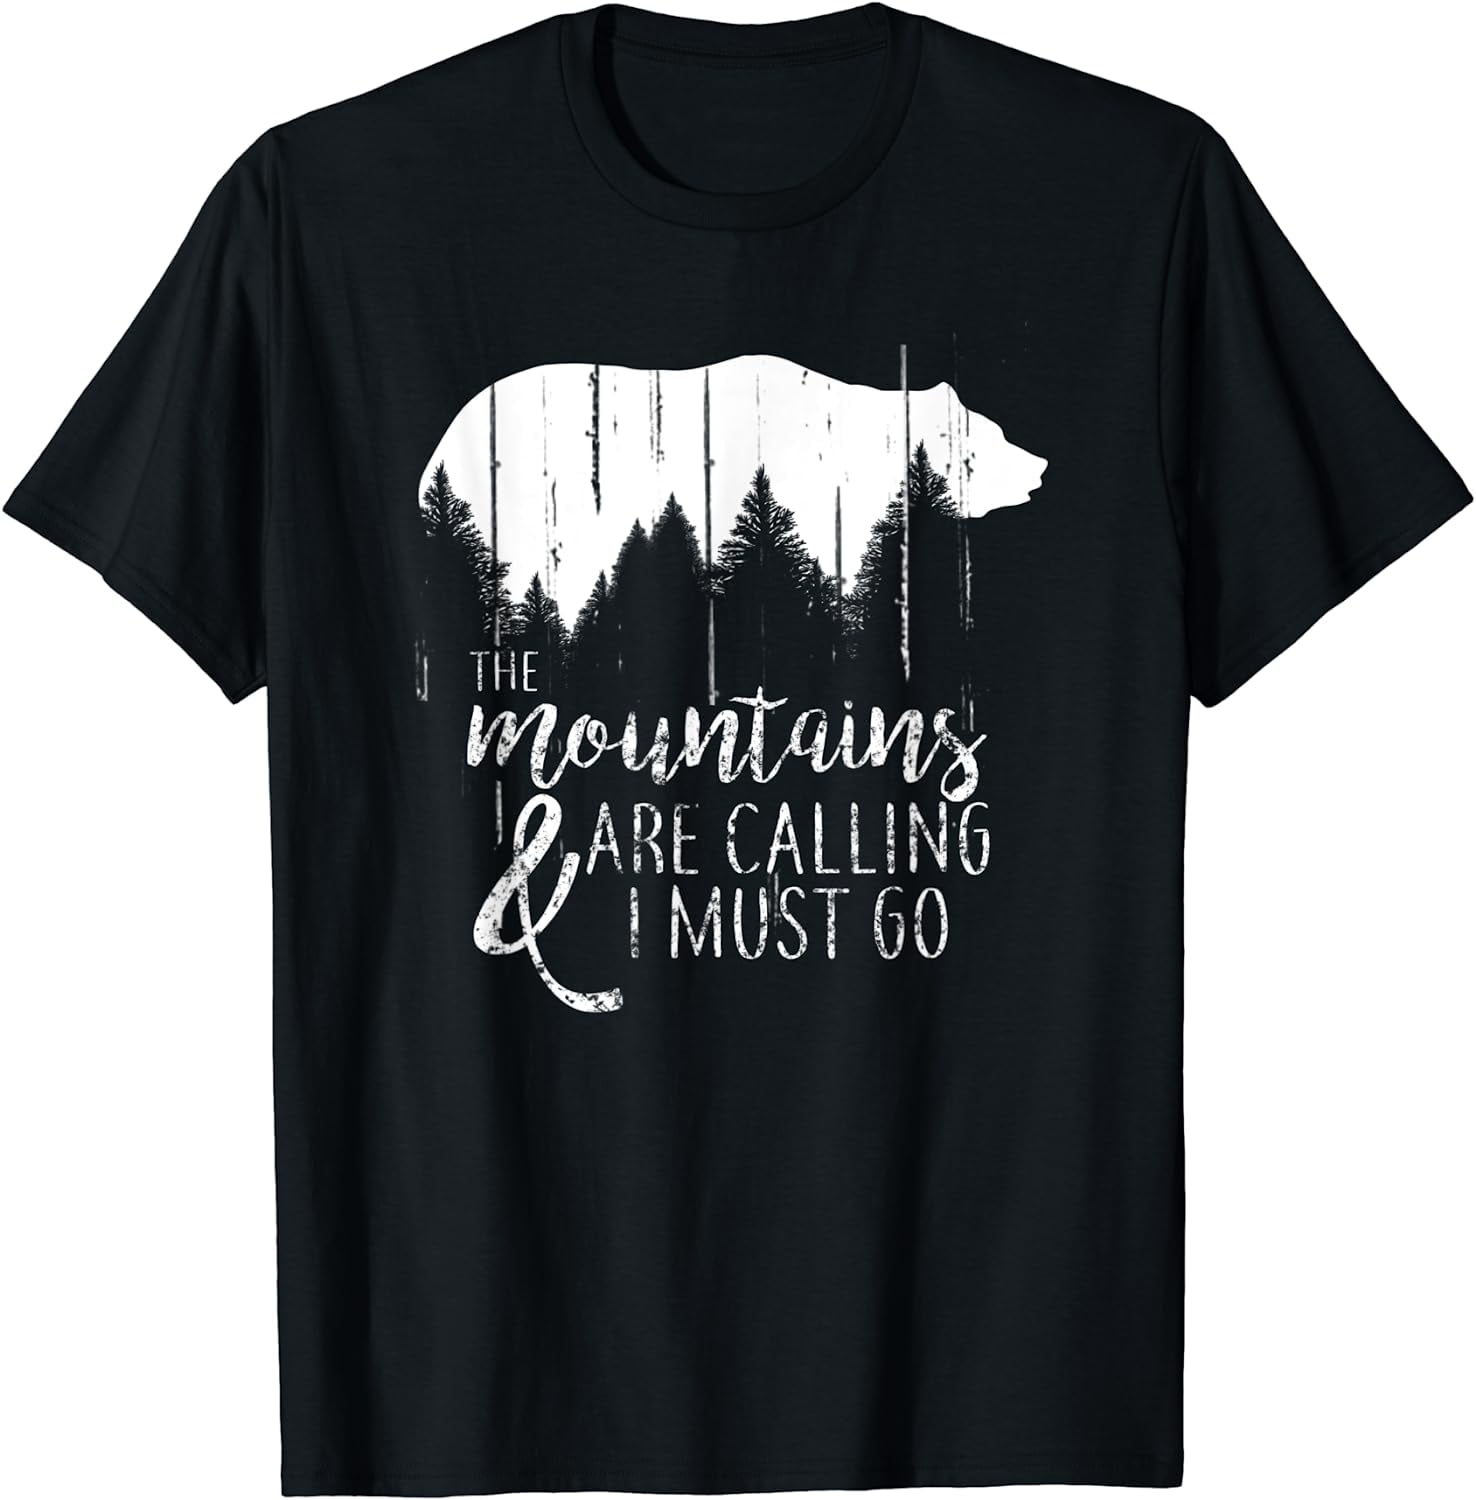 The Mountains are calling and i must go wild bear T-Shirt